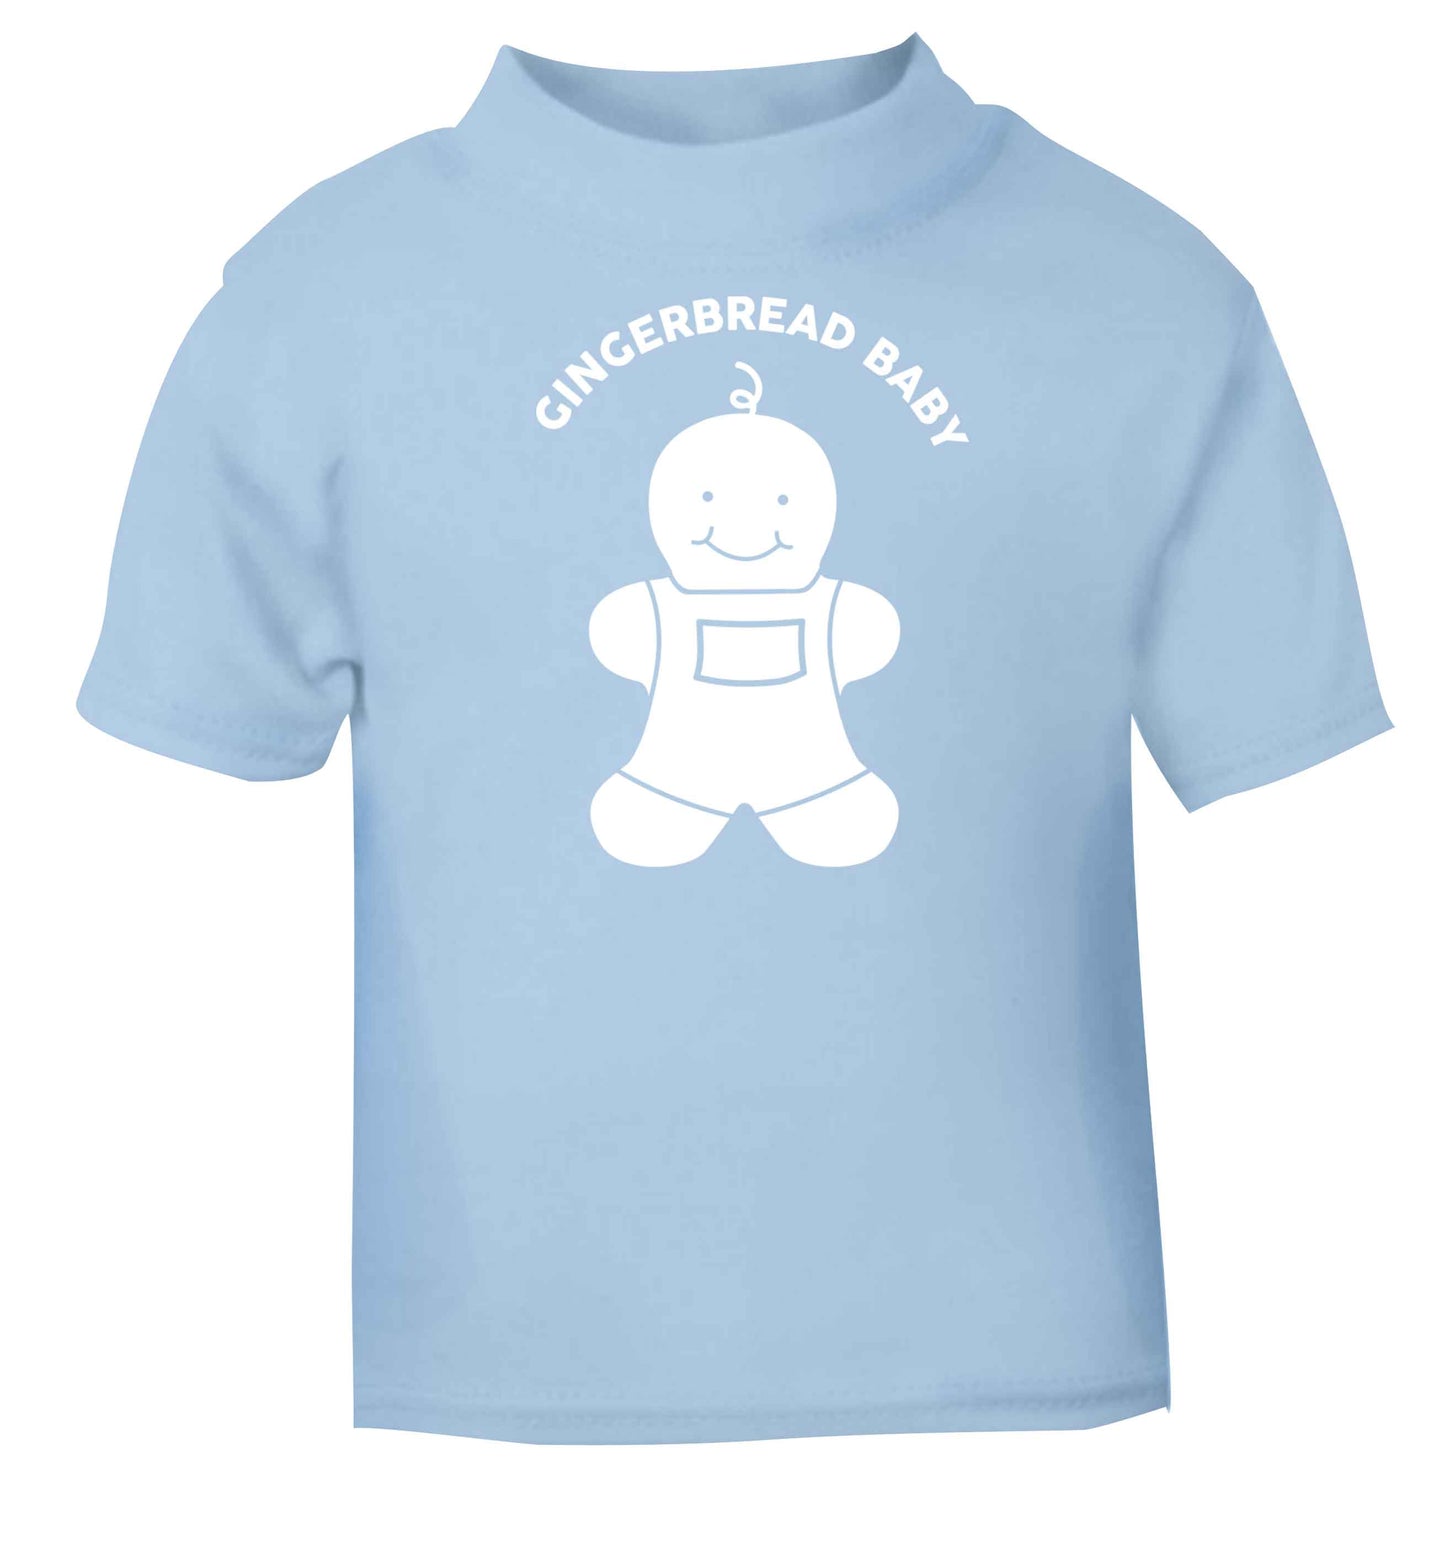 Gingerbread baby light blue baby toddler Tshirt 2 Years